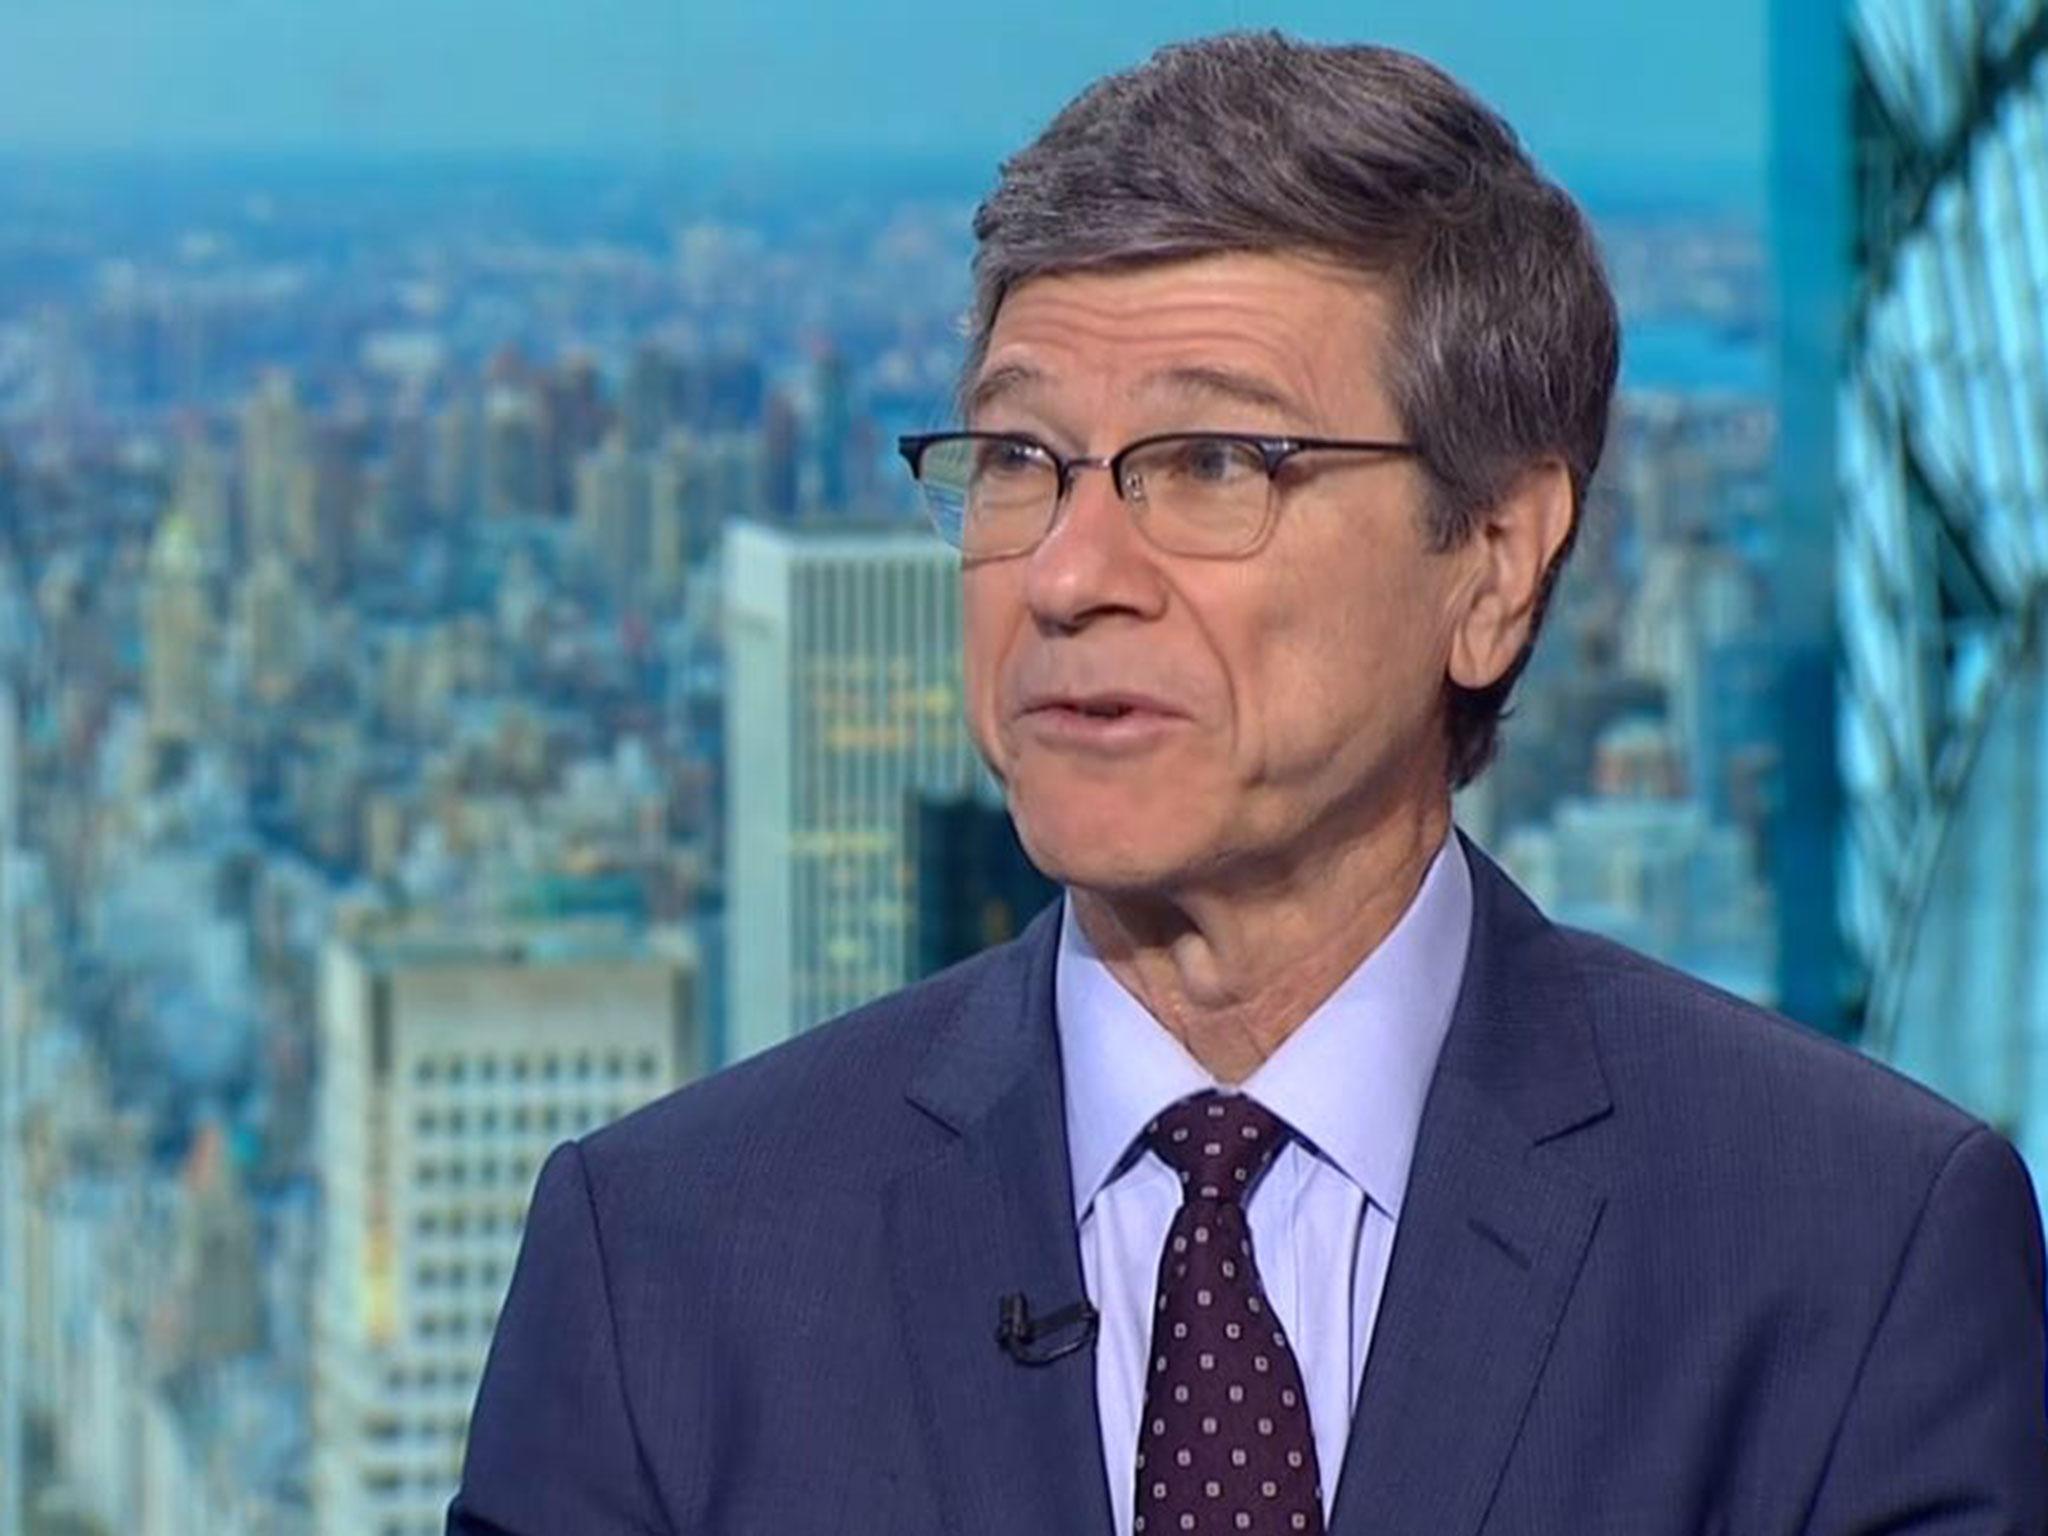 Jeffrey Sachs says 'patriots should oppose' Republican tax cuts and changes to health care